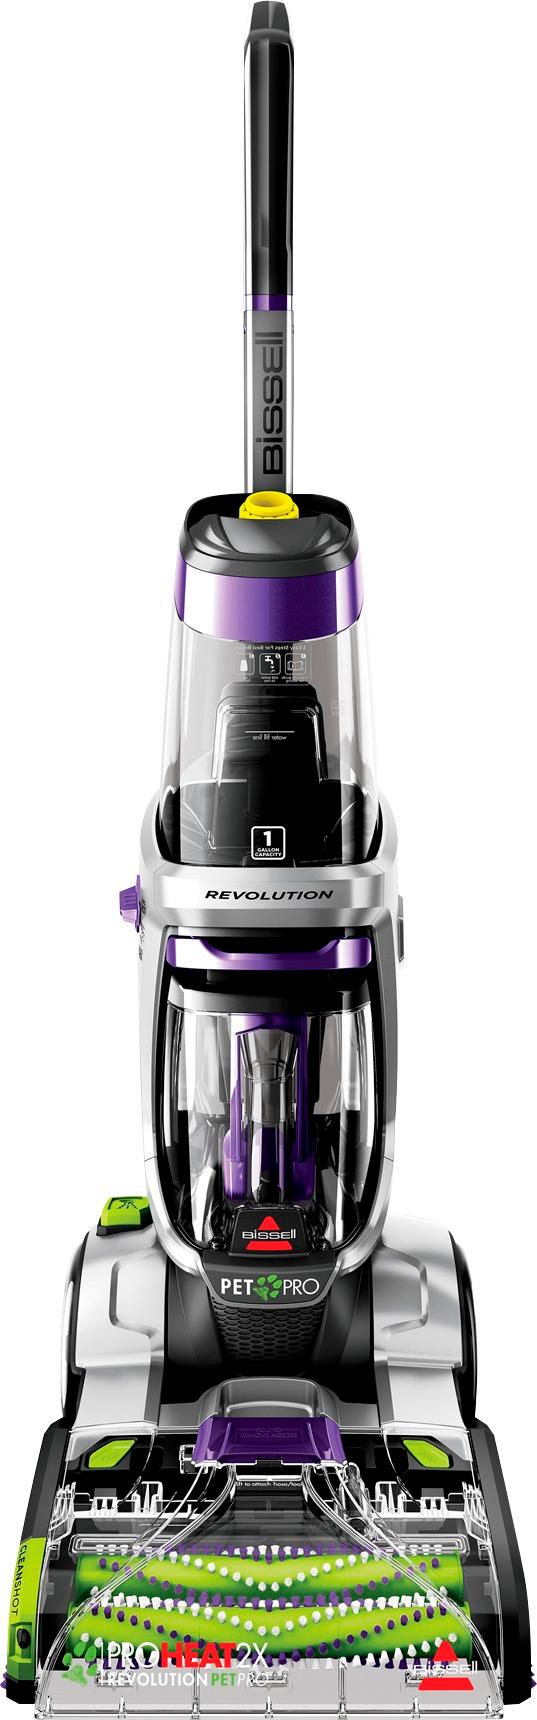 BISSELL - ProHeat 2X Revolution Pet Pro Upright Deep Cleaner - Silver/purple